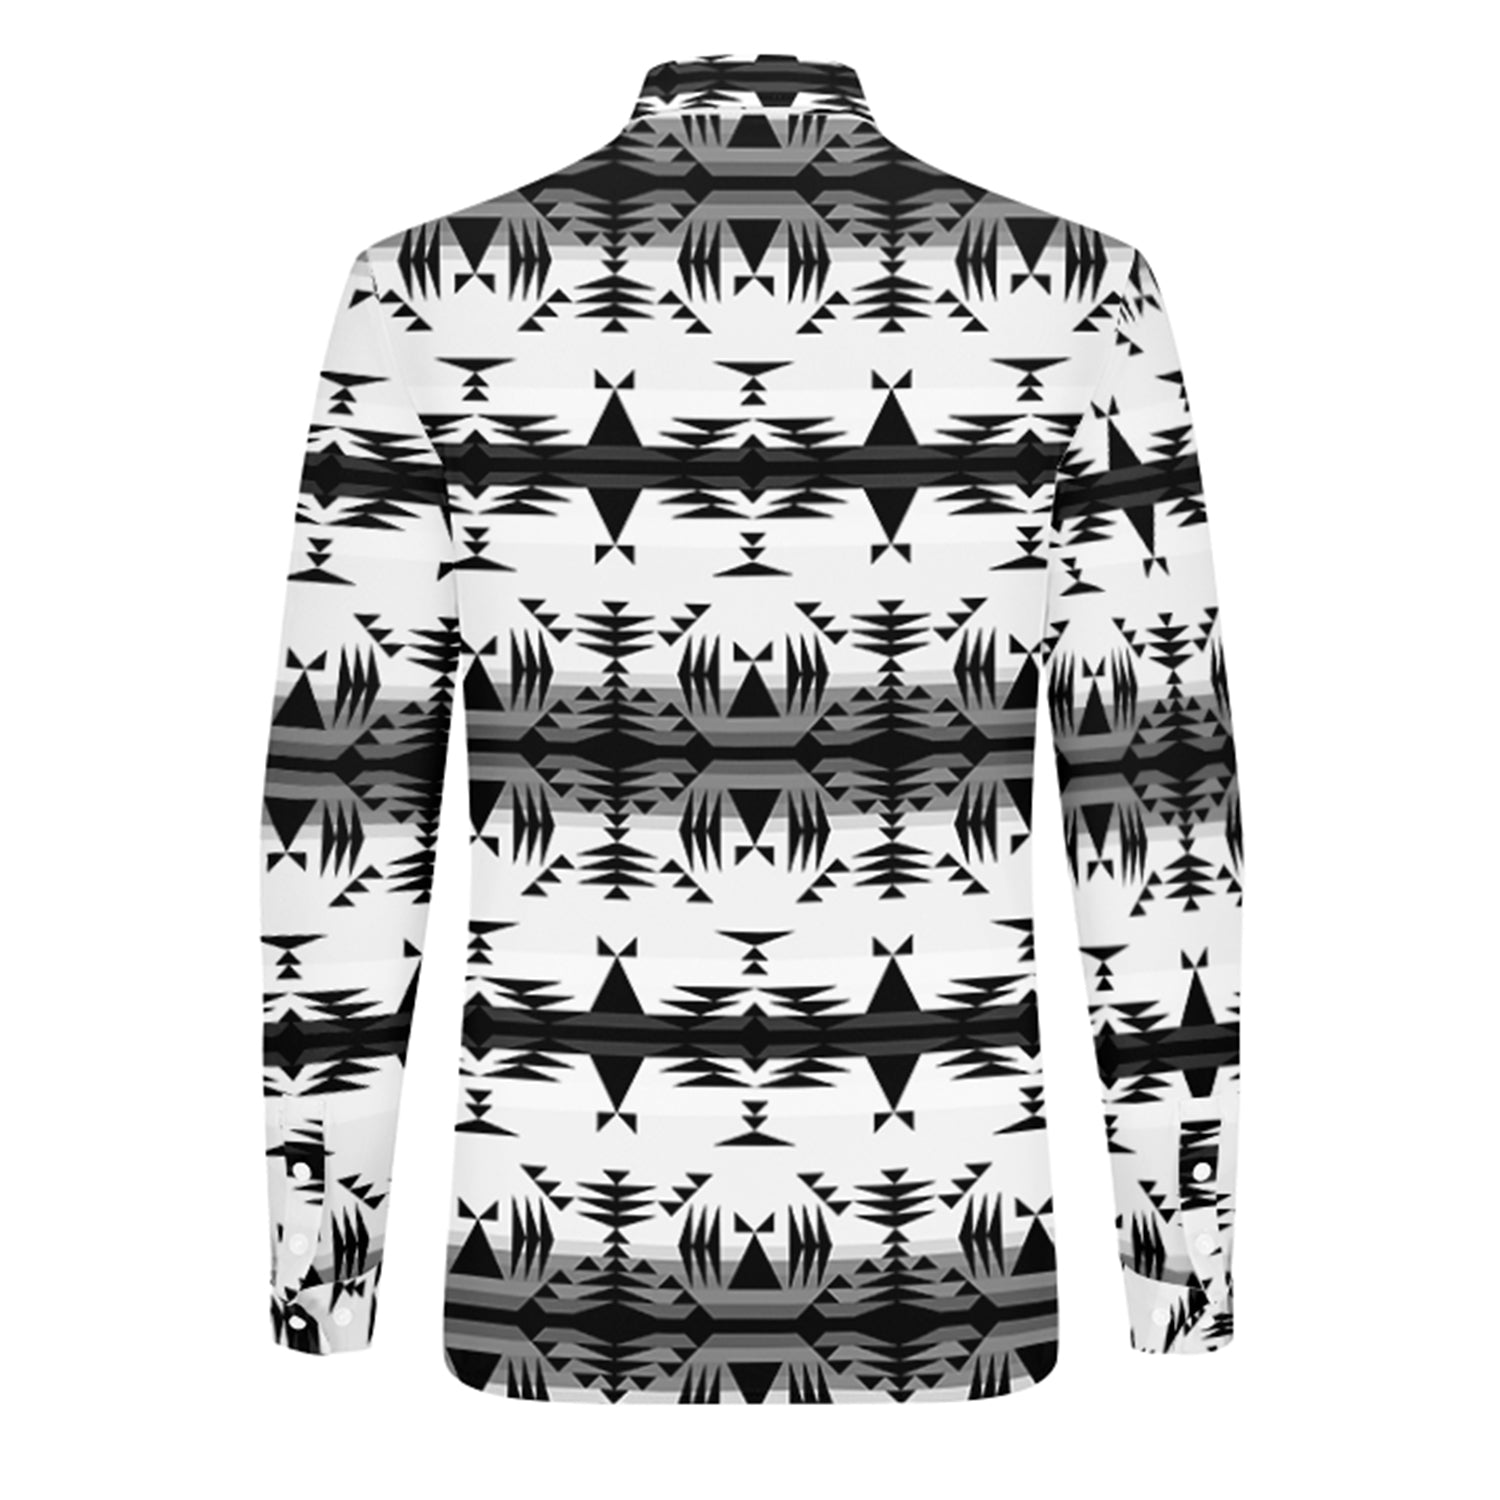 Between the Mountains White and Black Men's Long Sleeve Dress Shirt